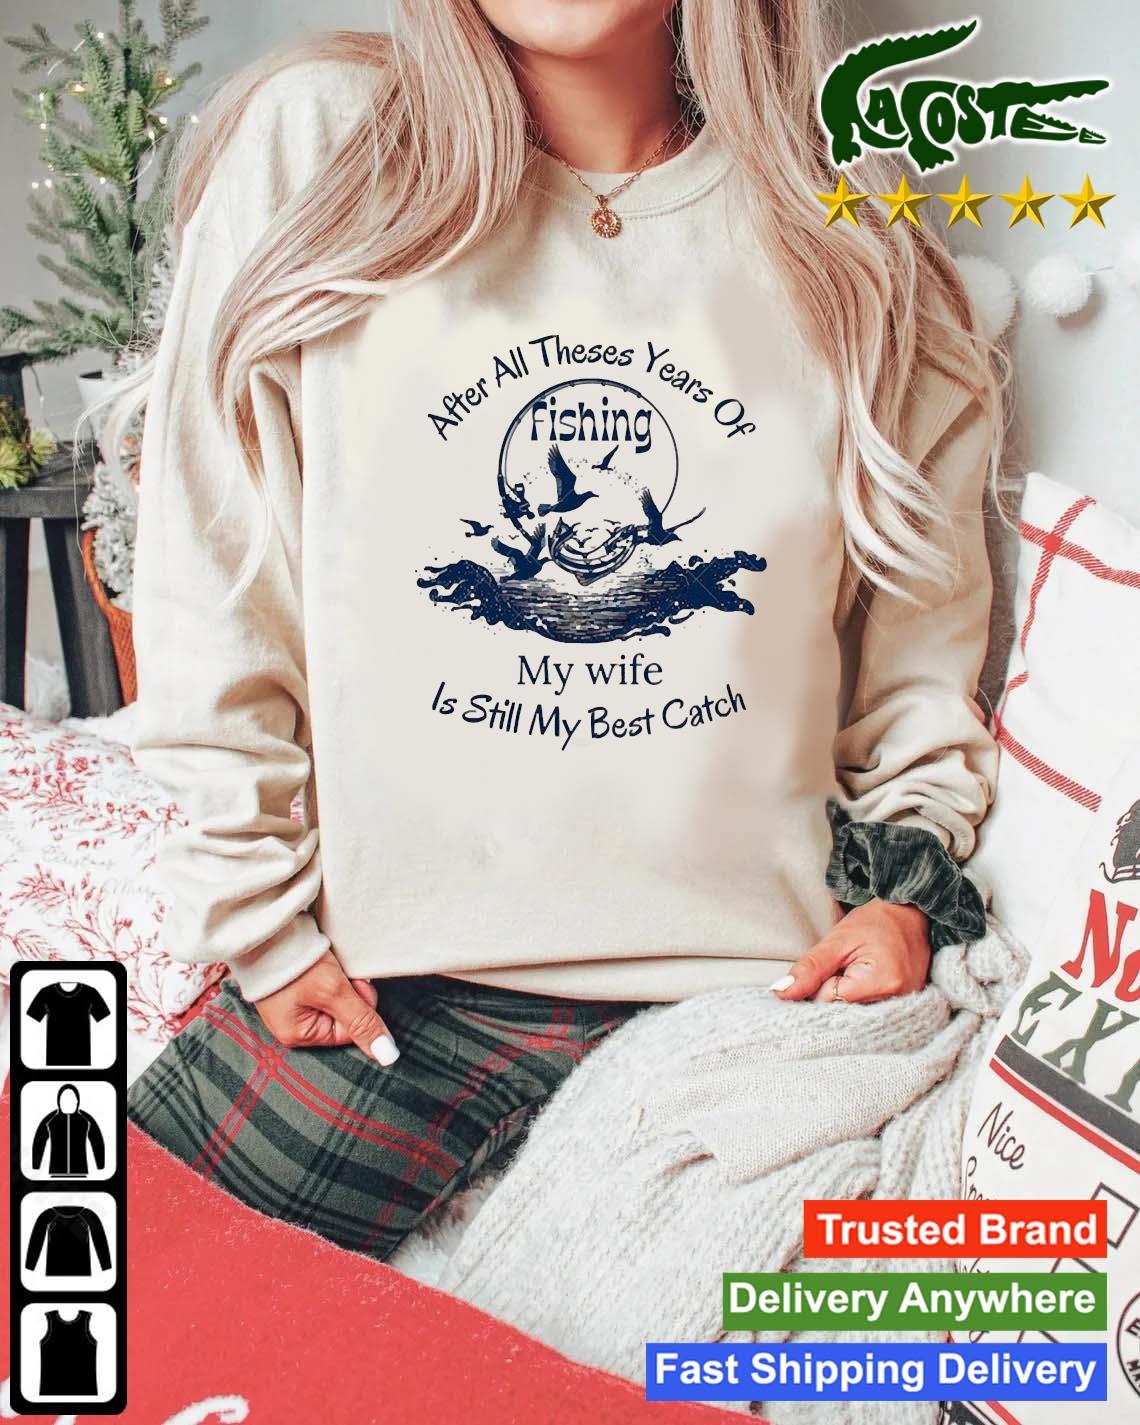 After All Theses Year Of Fishing My Wife Is Still My Best Catch Sweats Mockup Sweater